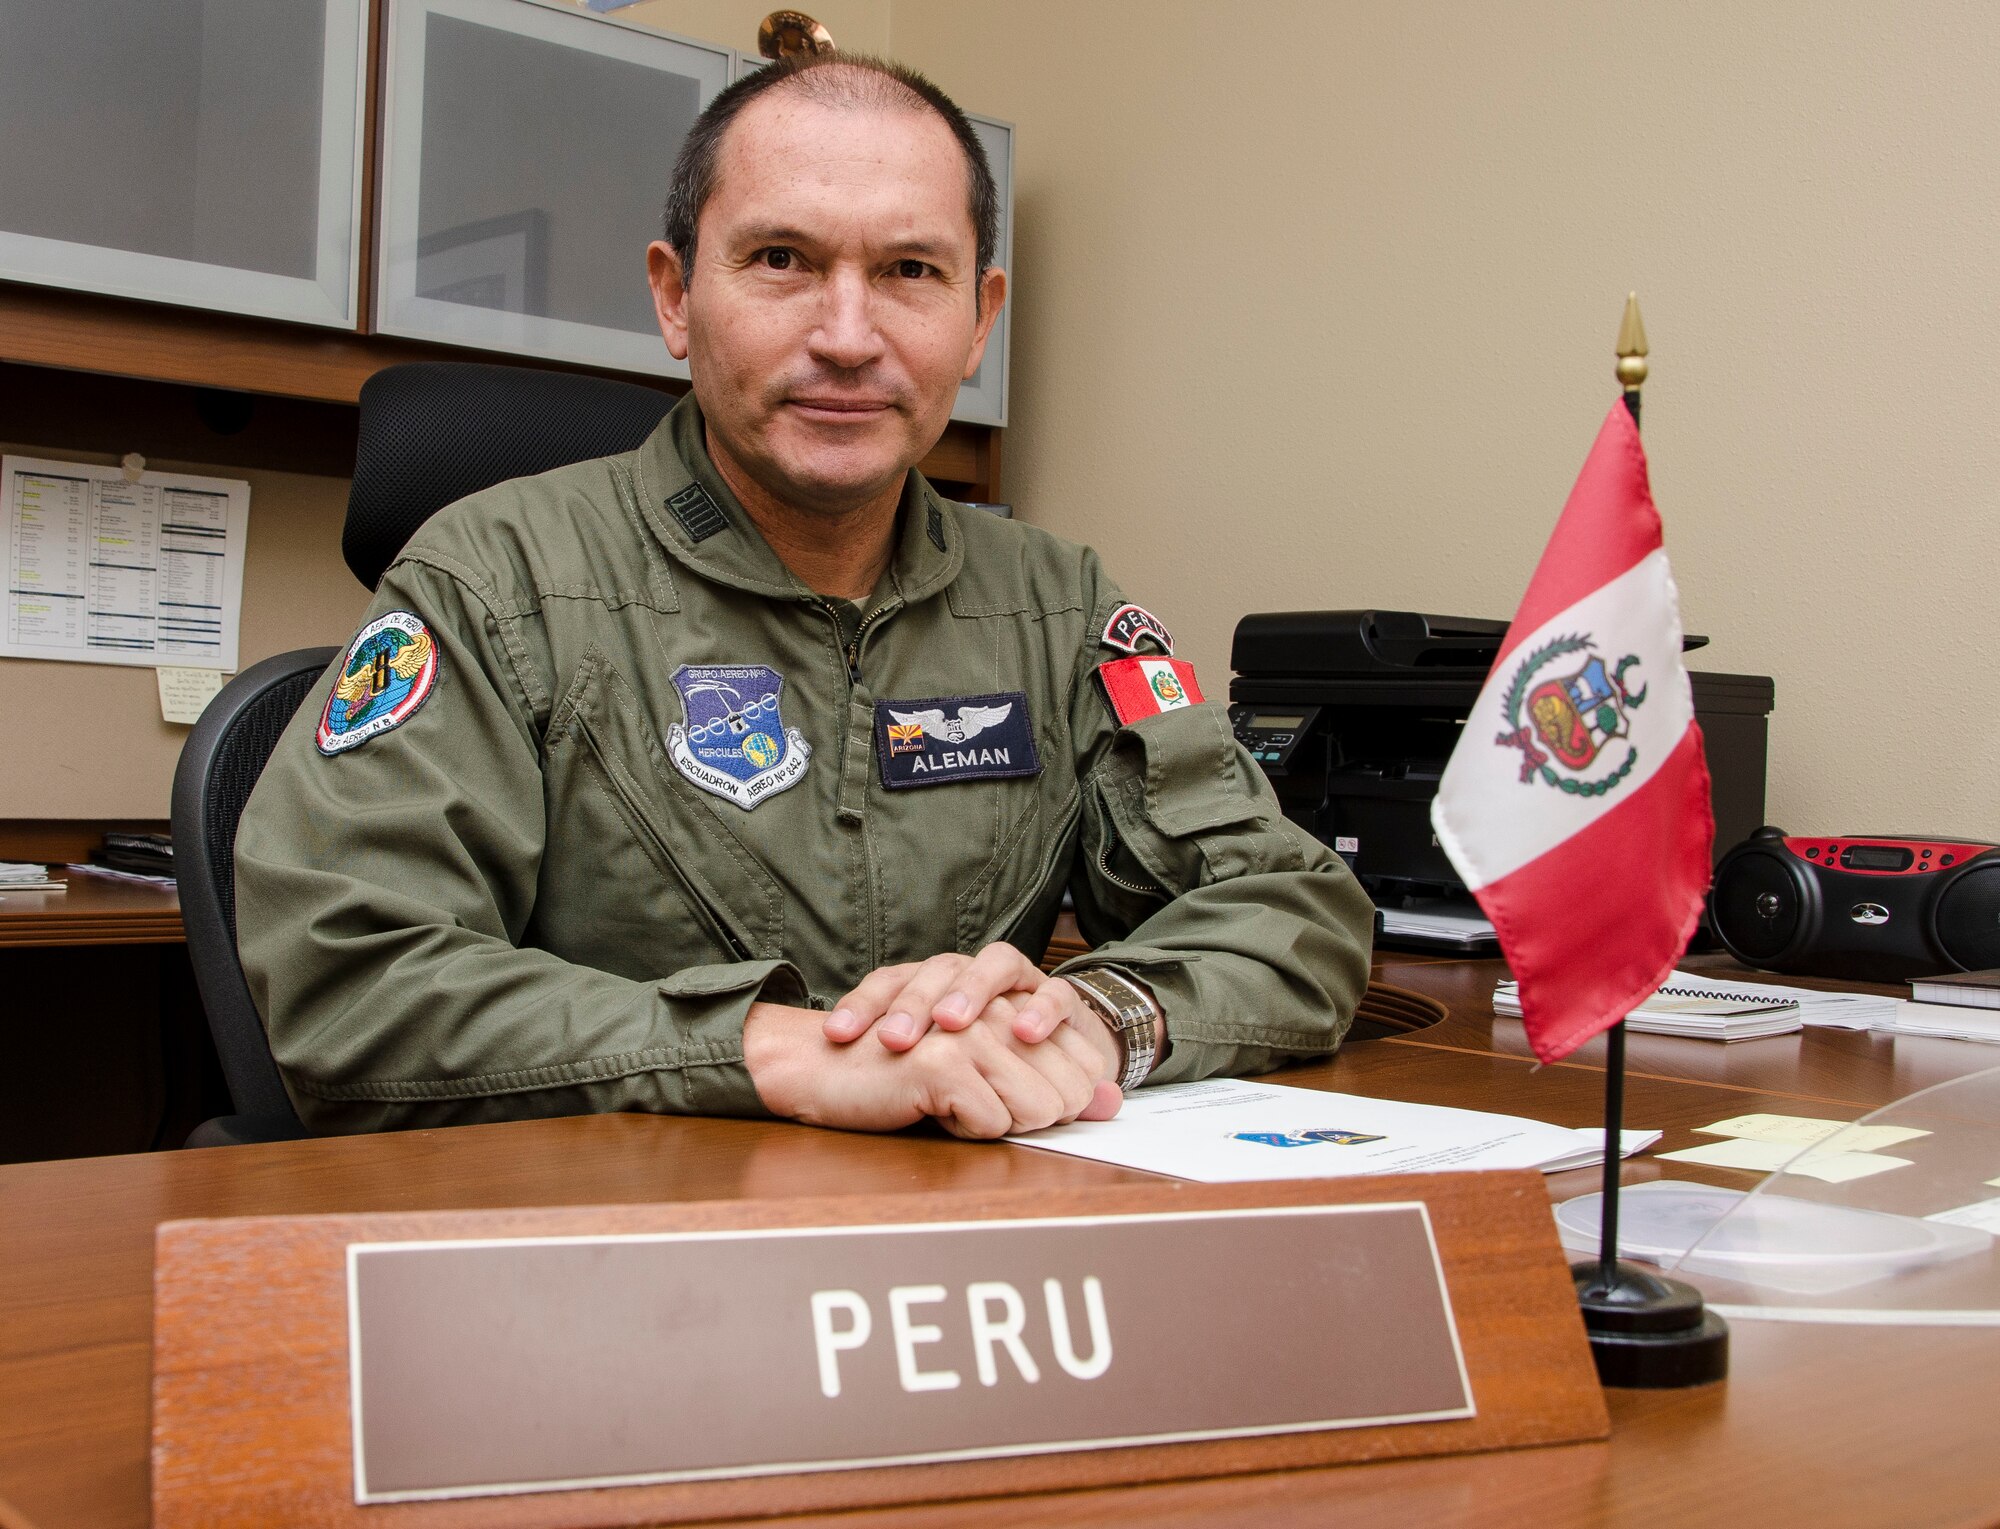 Colonel Jaime Aleman, Air Forces Southern Peruvian Liaison Officer, smiles before preparing to execute his daily duties as LNO at Davis-Monthan AFB, Ariz., Nov. 5, 2014. Aleman, who has served eight months of his two year tour of duty as the AFSOUTH Peruvian LNO, is using his time at Davis-Monthan to build partner capacity between the United States and Peru, while improving his English language skills. (U.S. Air Force photo by Staff Sgt. Adam Grant/Released)